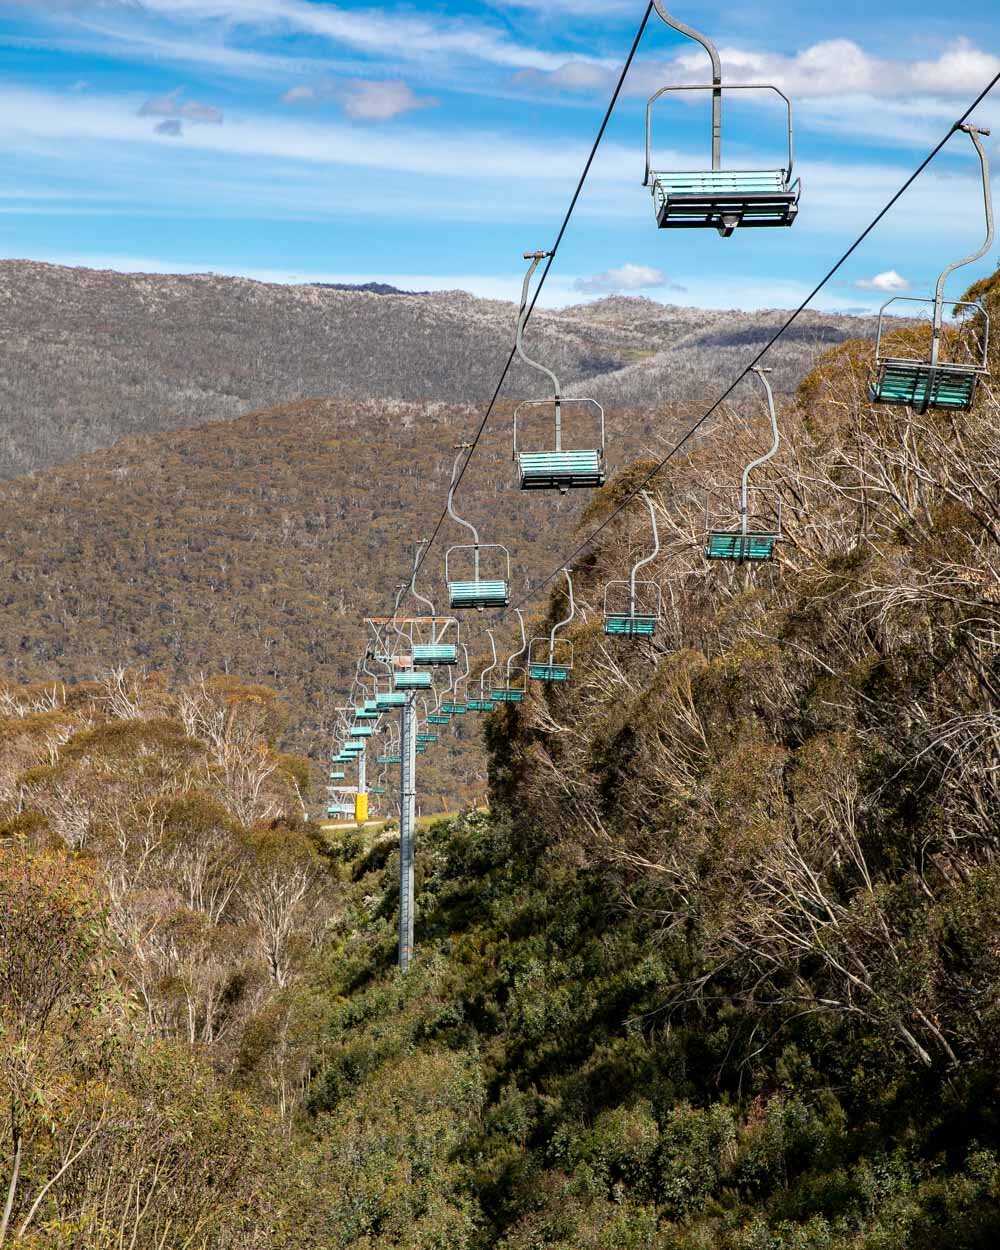 Taking the chairlift in Thredbo